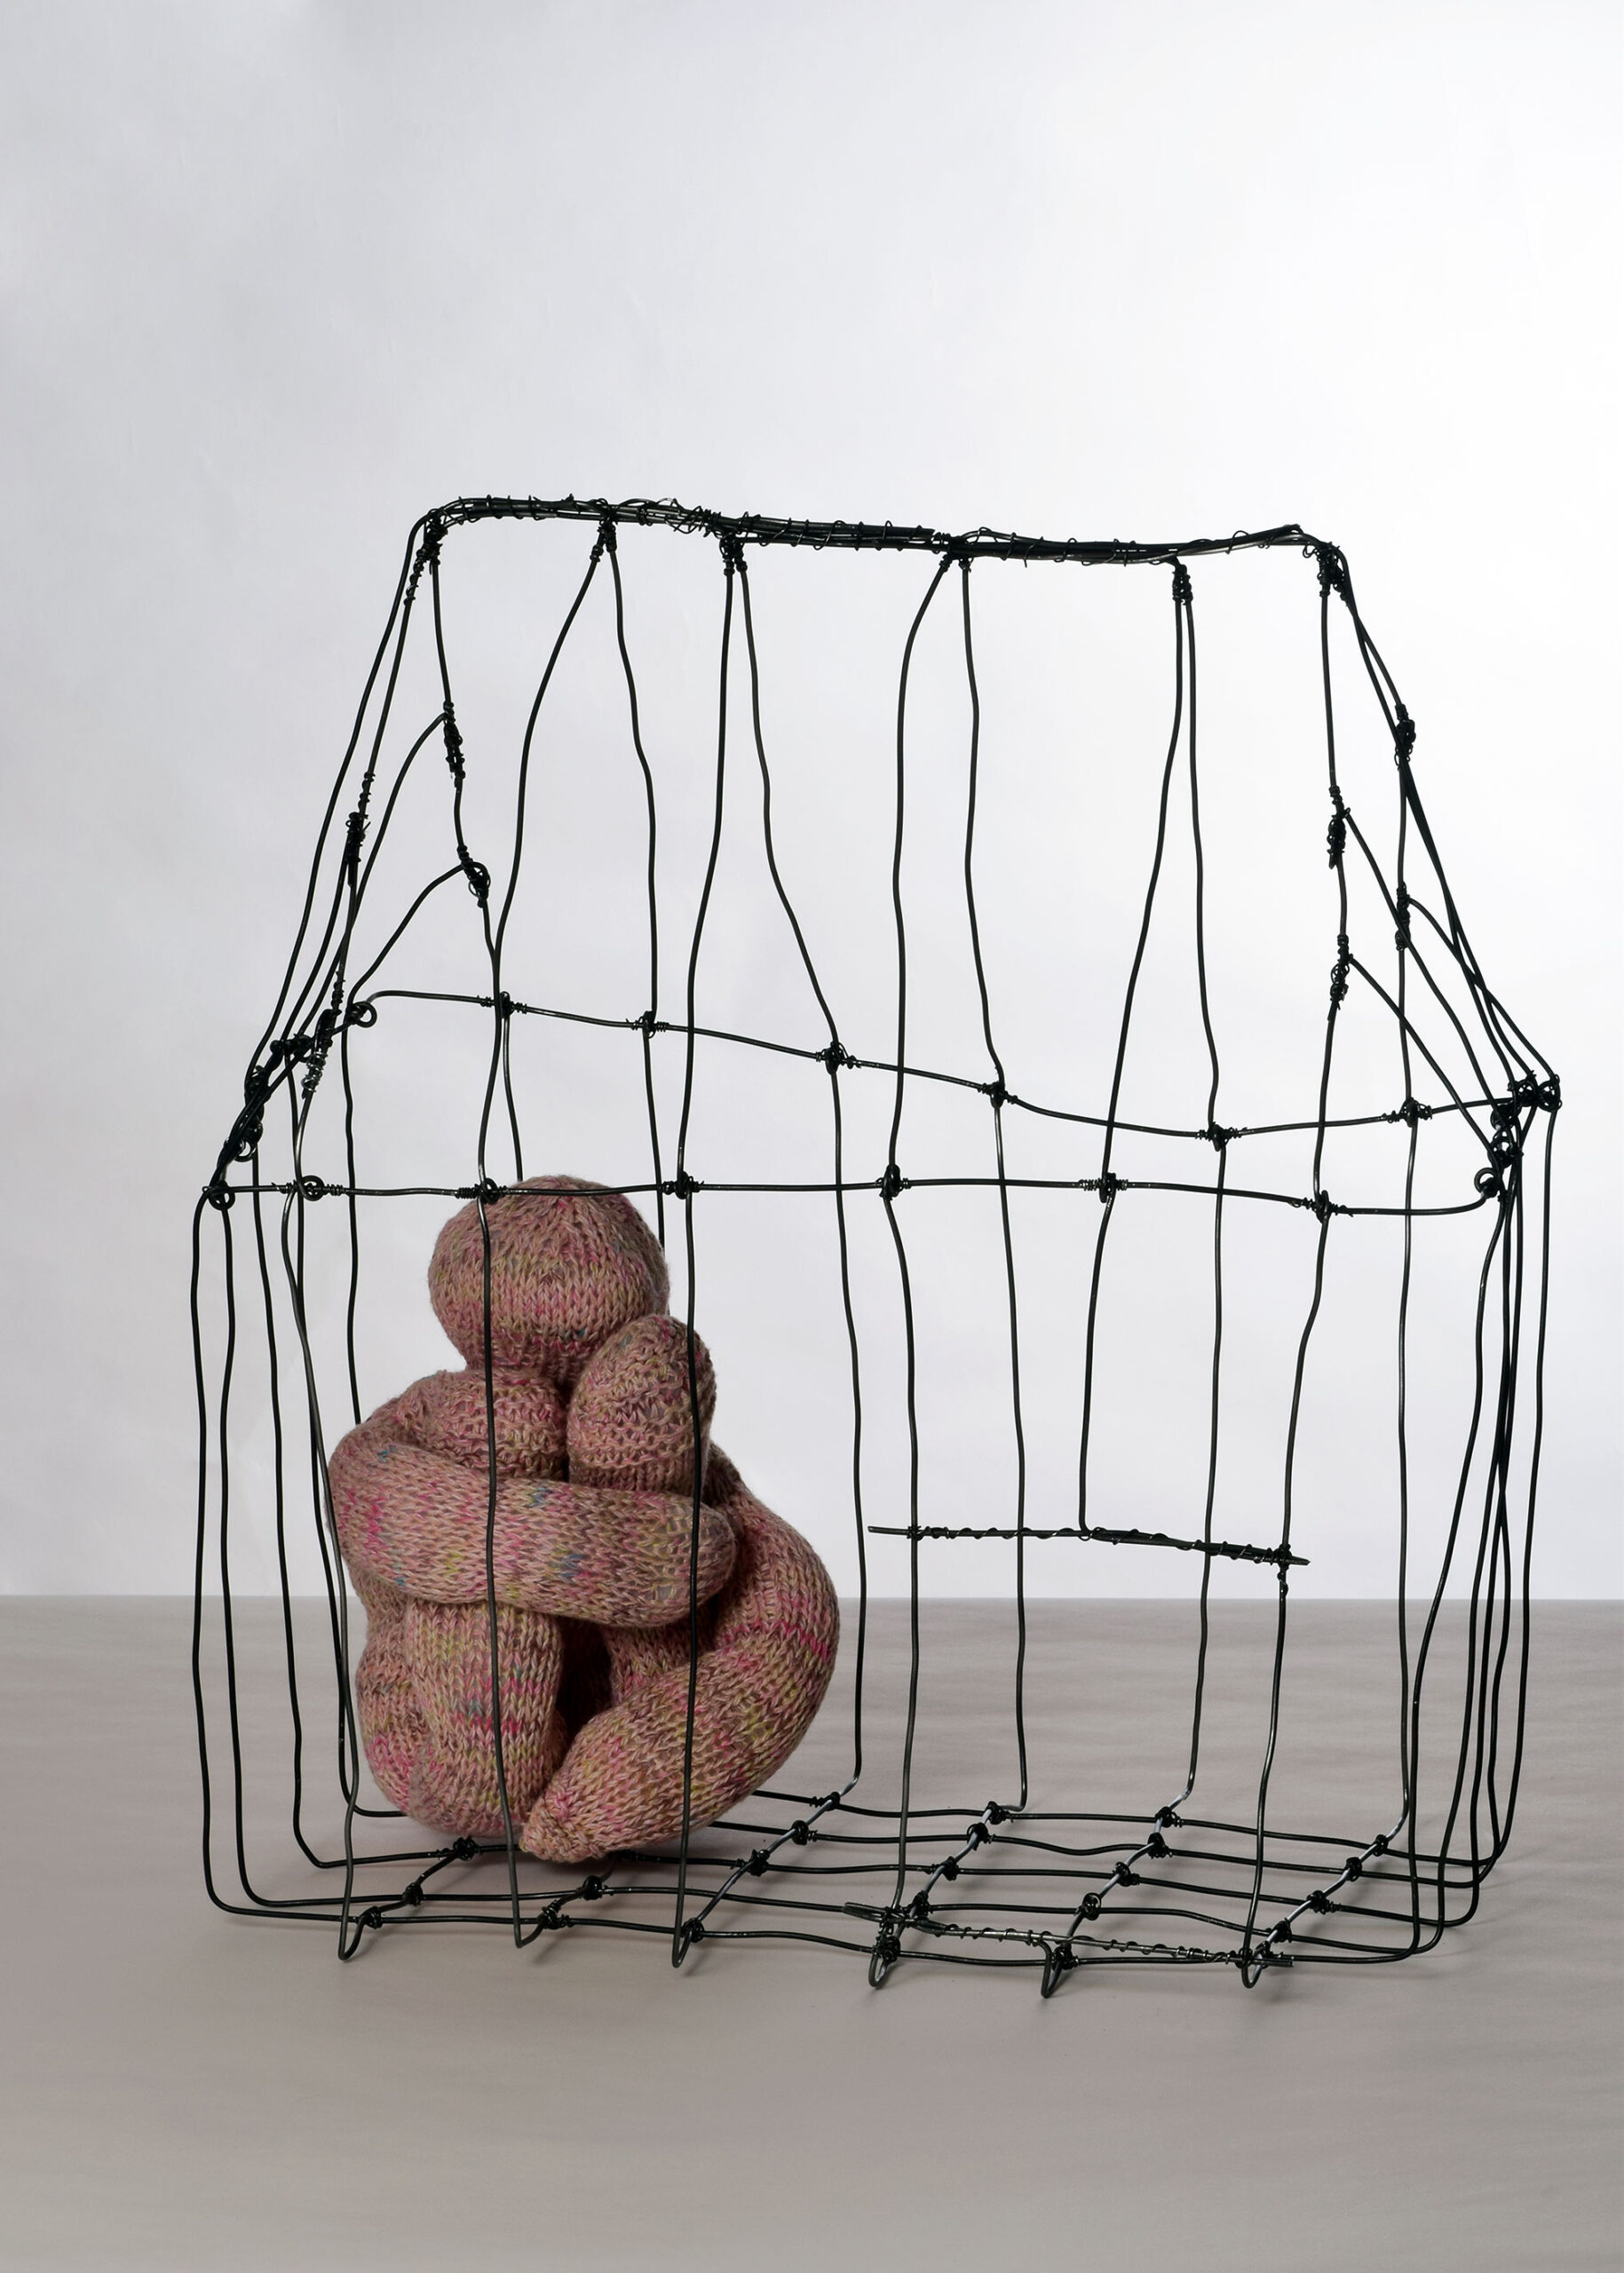 Sculpture with cage